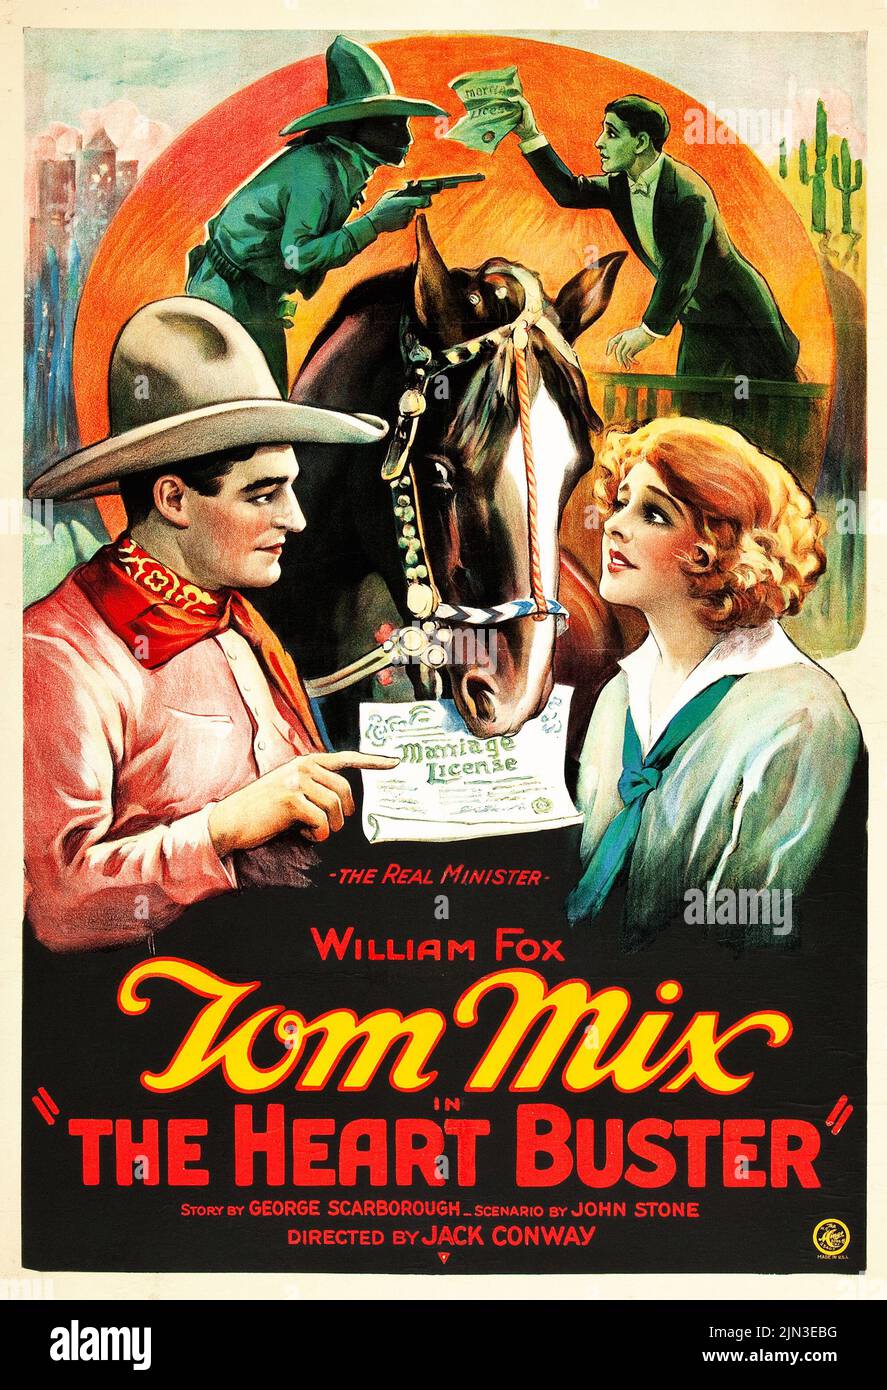 Vintage movie poster for the American comedy western film The Heart Buster (1925) starring Tom Mix Stock Photo